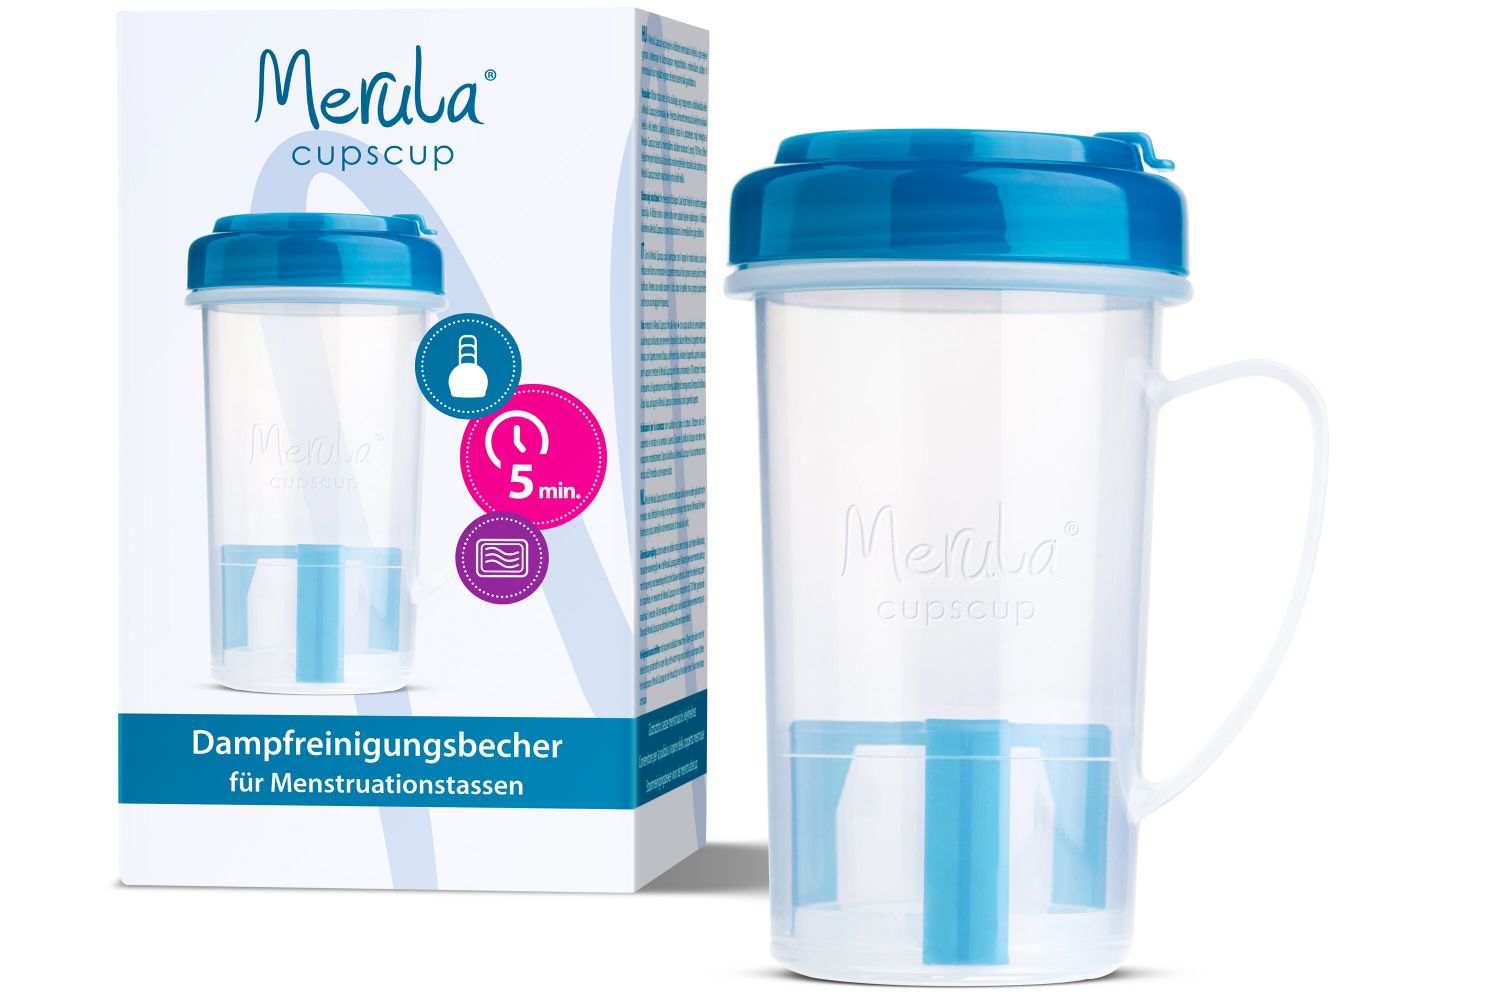 Merula Cupscup Steam Cleaning Cup for Menstrual Cups